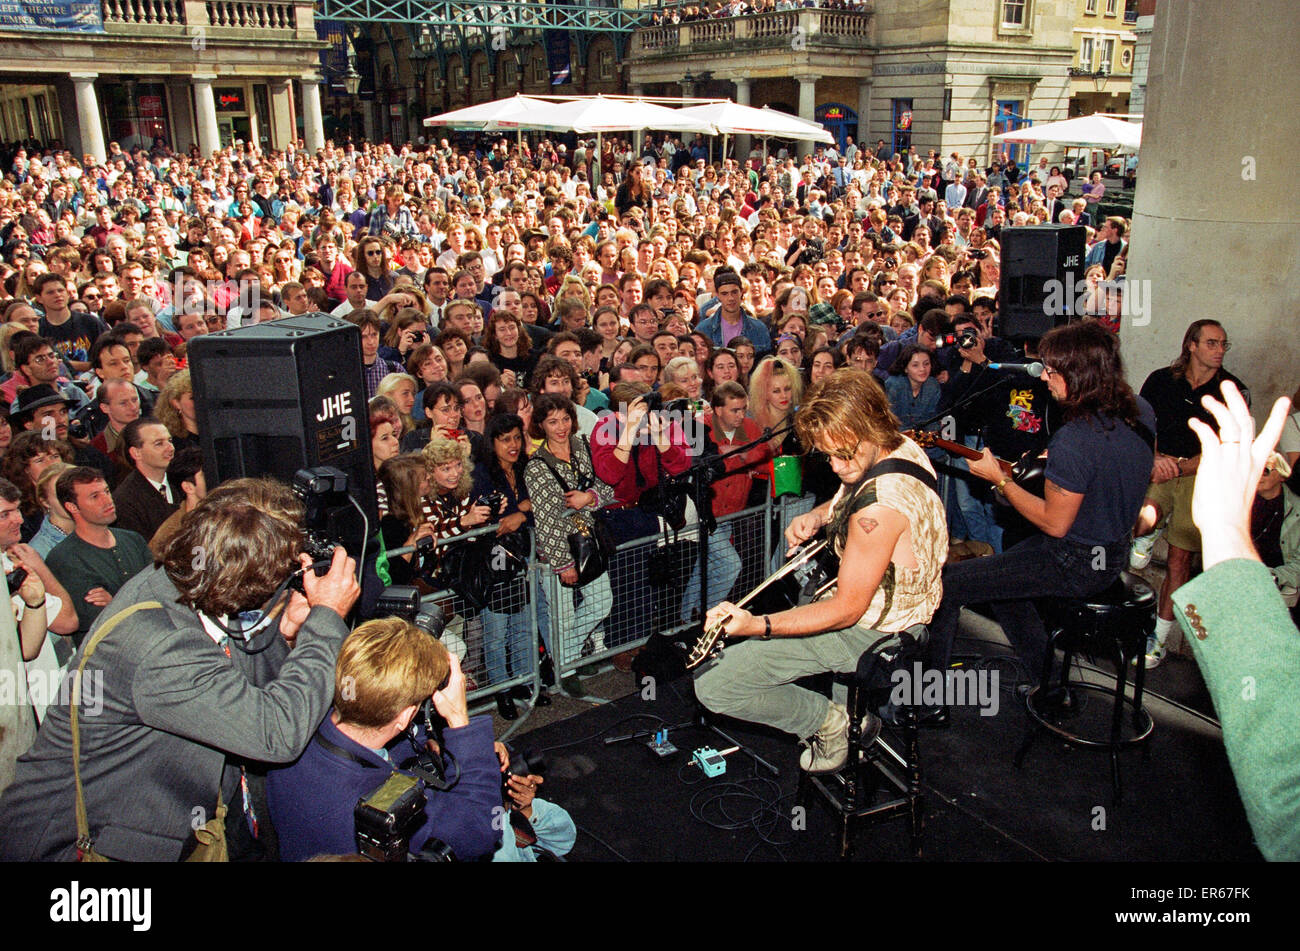 Jon Bon Jovi, lead singer of rock group Bon Jovi, busking in Covent Garden, London - and vowed a crowd of 5,000, 7th September 1994. Jubilant fans completely blocked the historic piazza as the heavy metal idol and his lead guitarist Richie Sambora belted Stock Photo